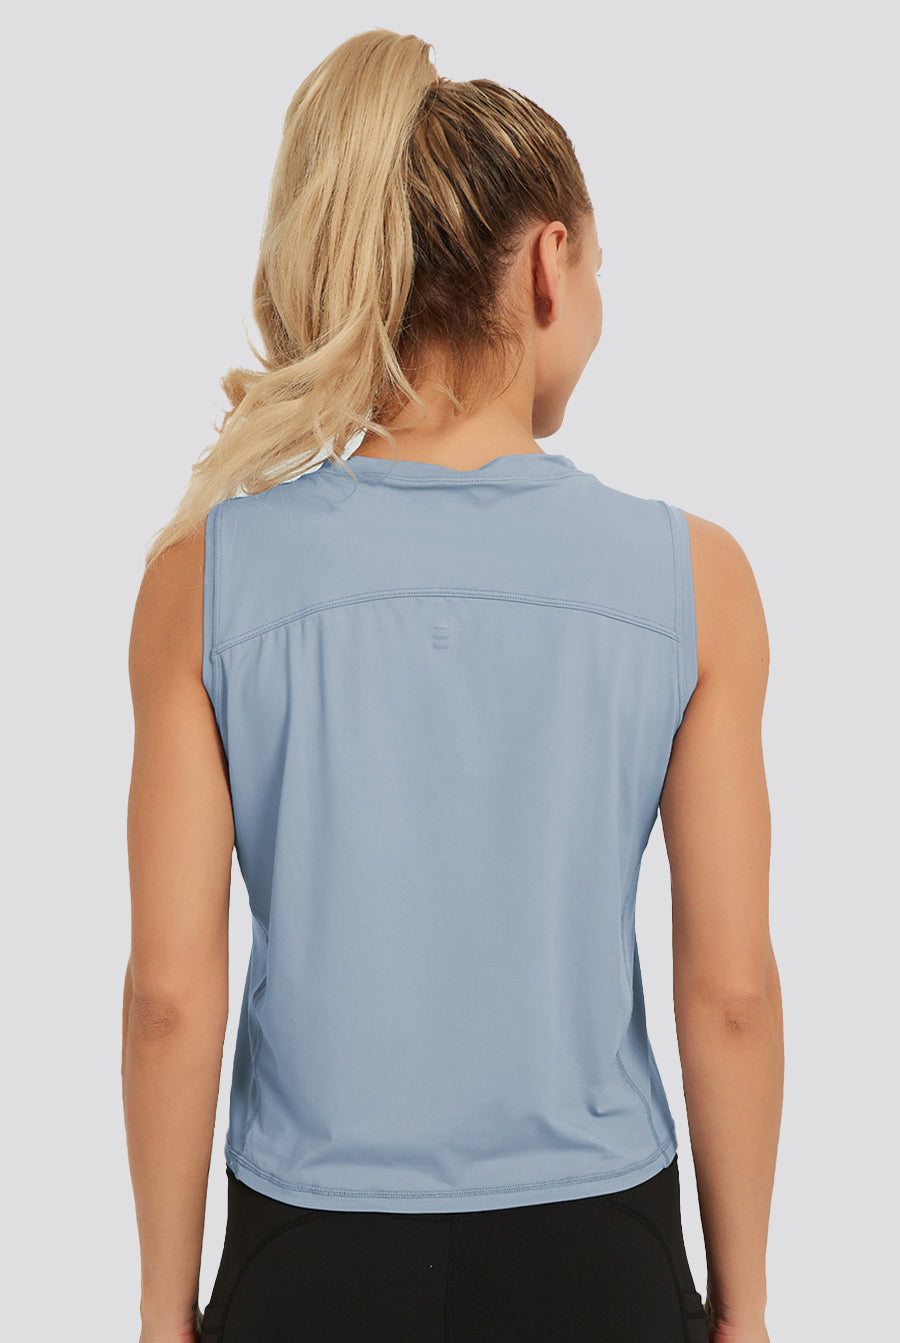 womens sleeves workout tops blue